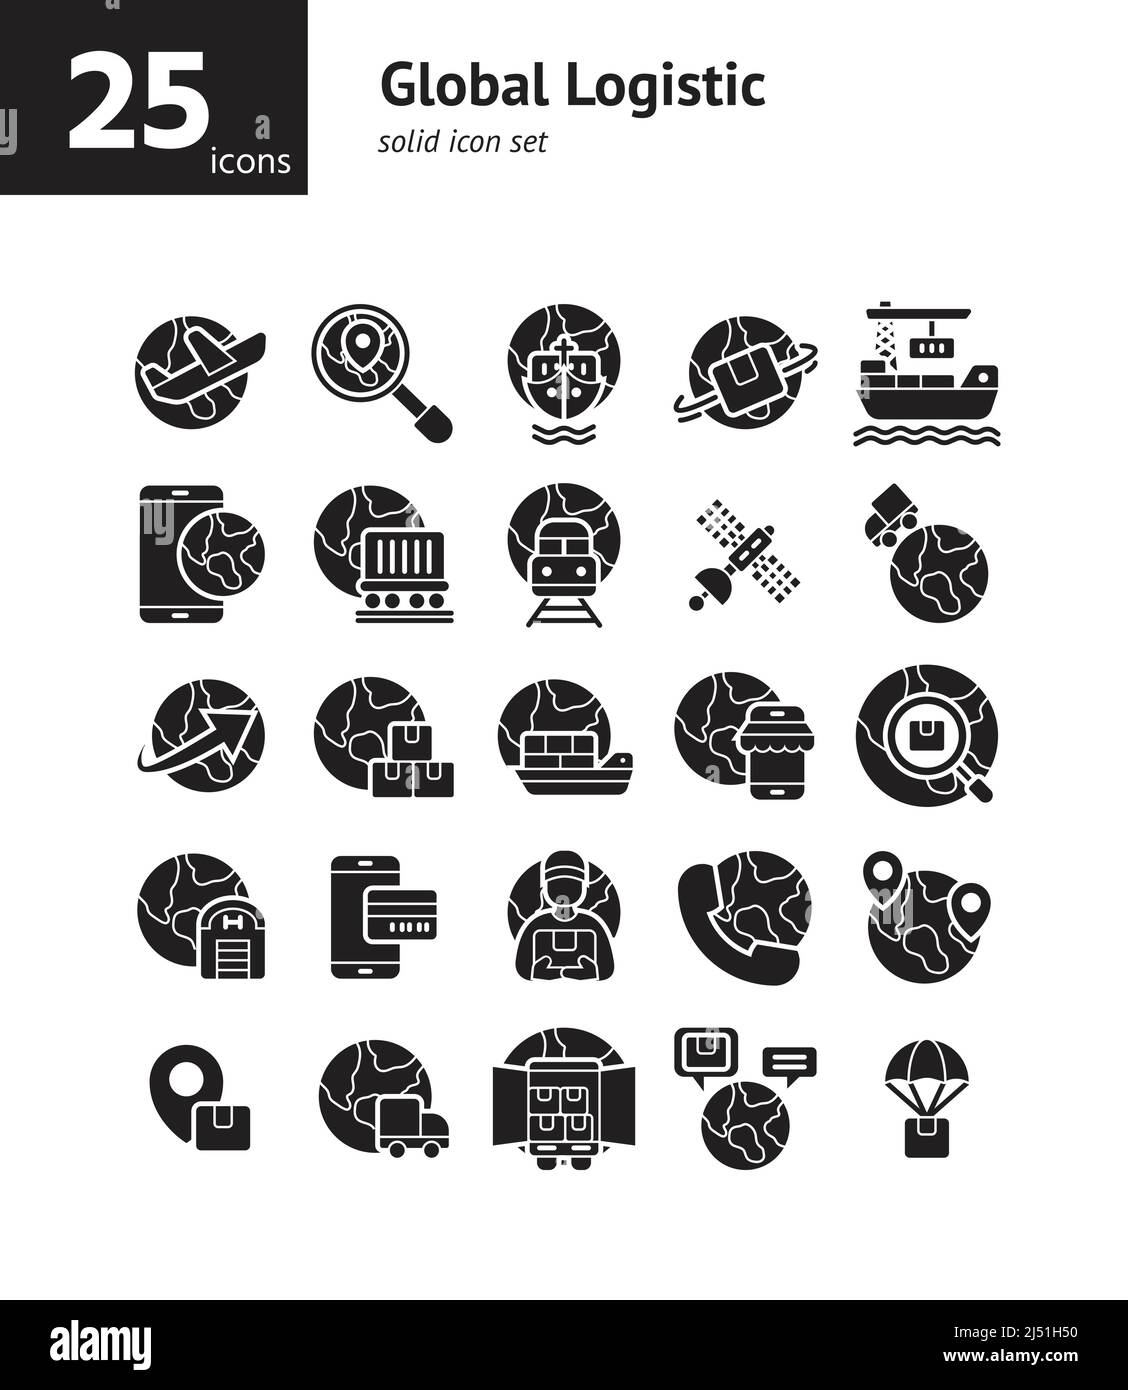 Global Logistic solid icon set. Vector and Illustration. Stock Vector